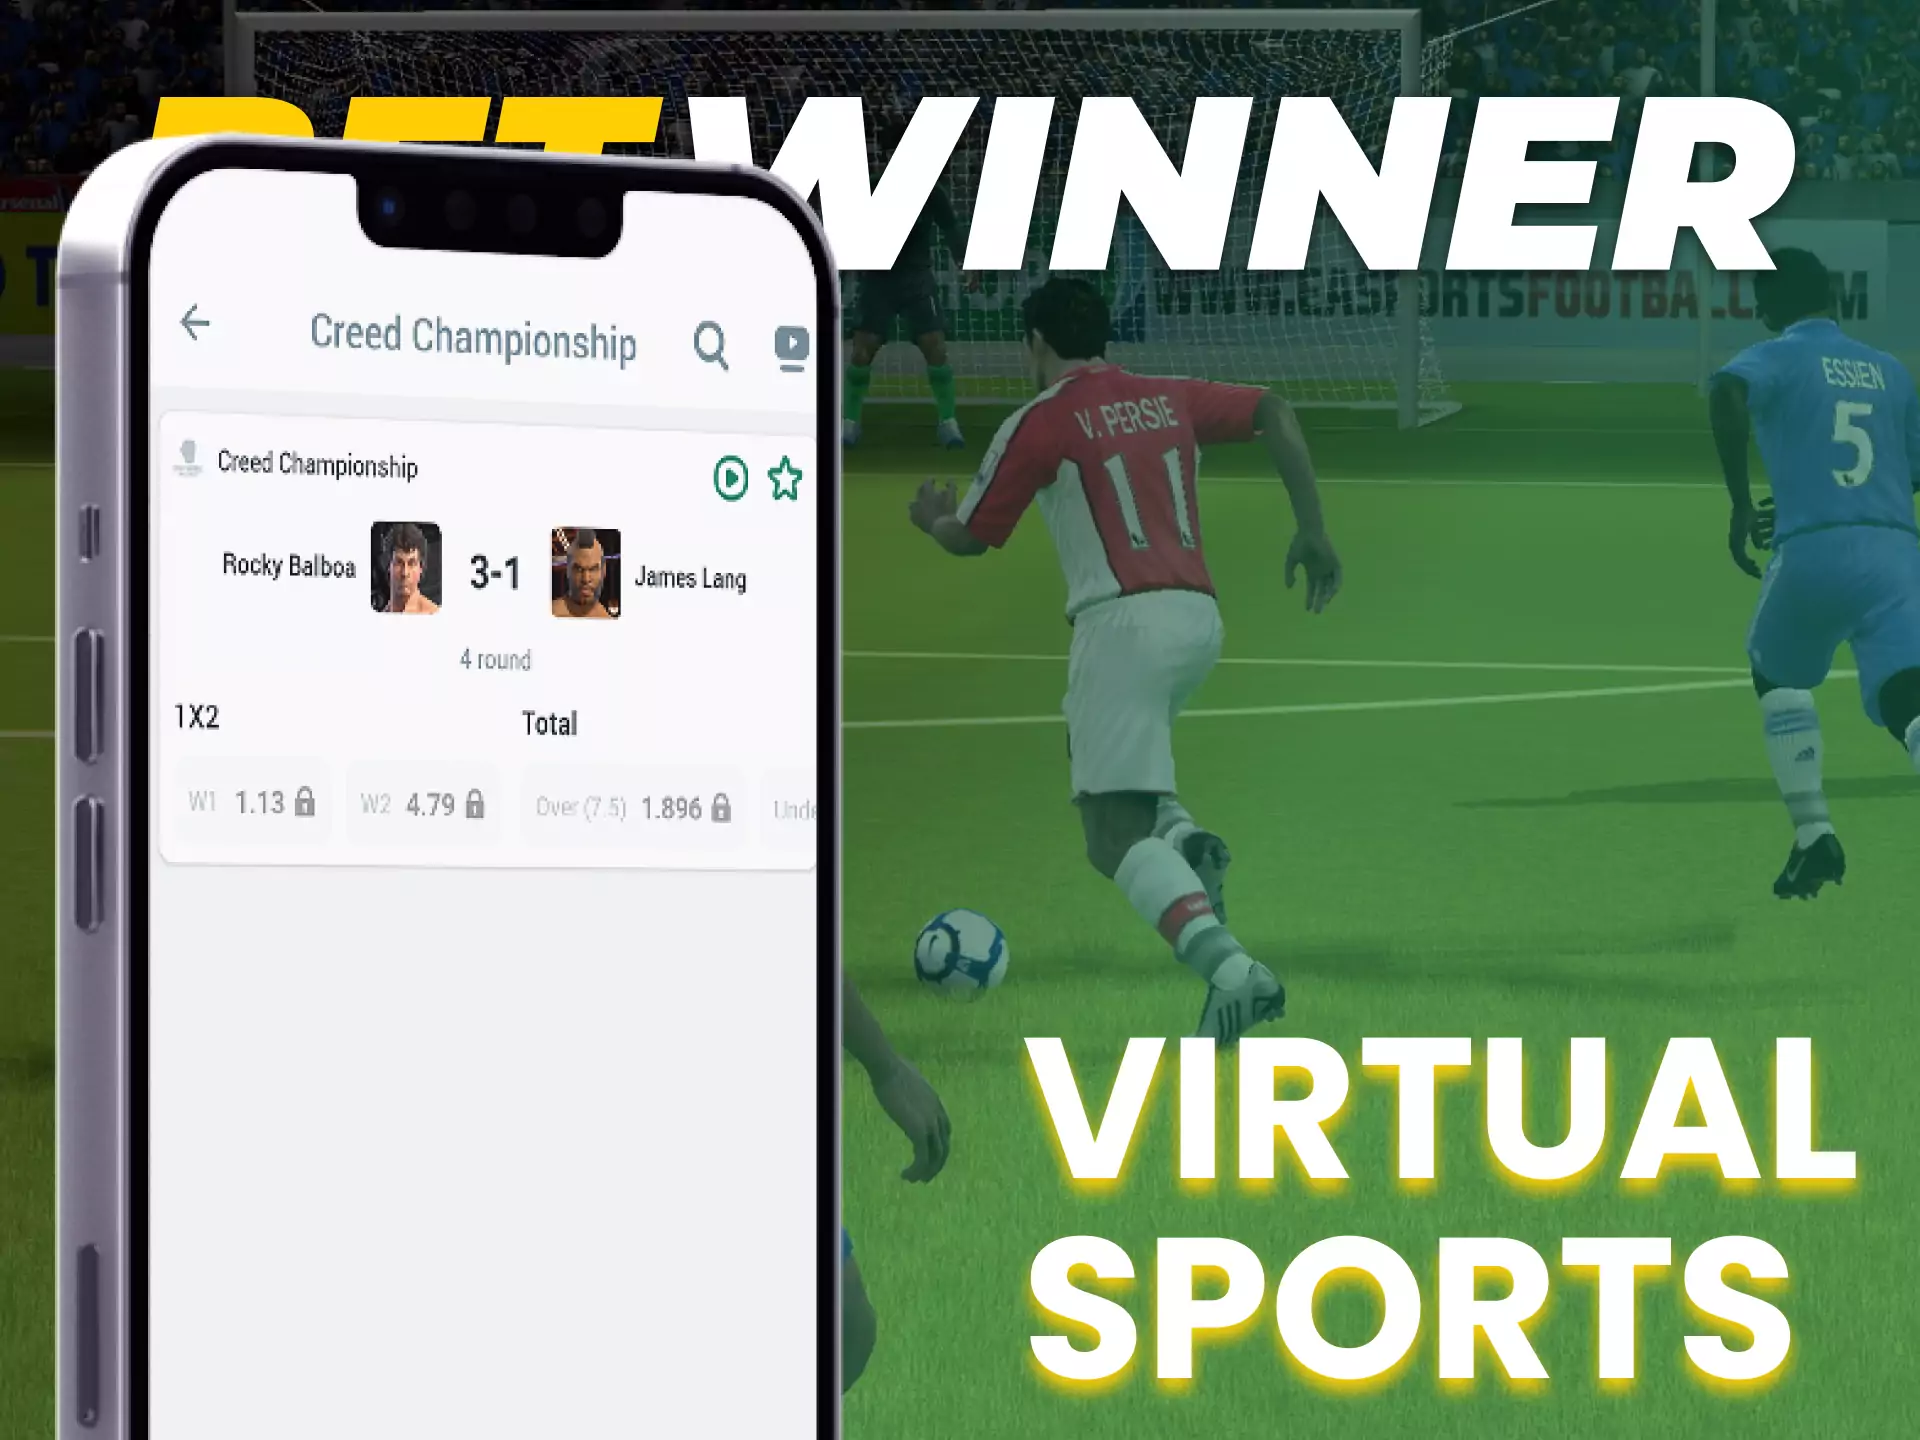 With the Betwinner app, bet on virtual sports.